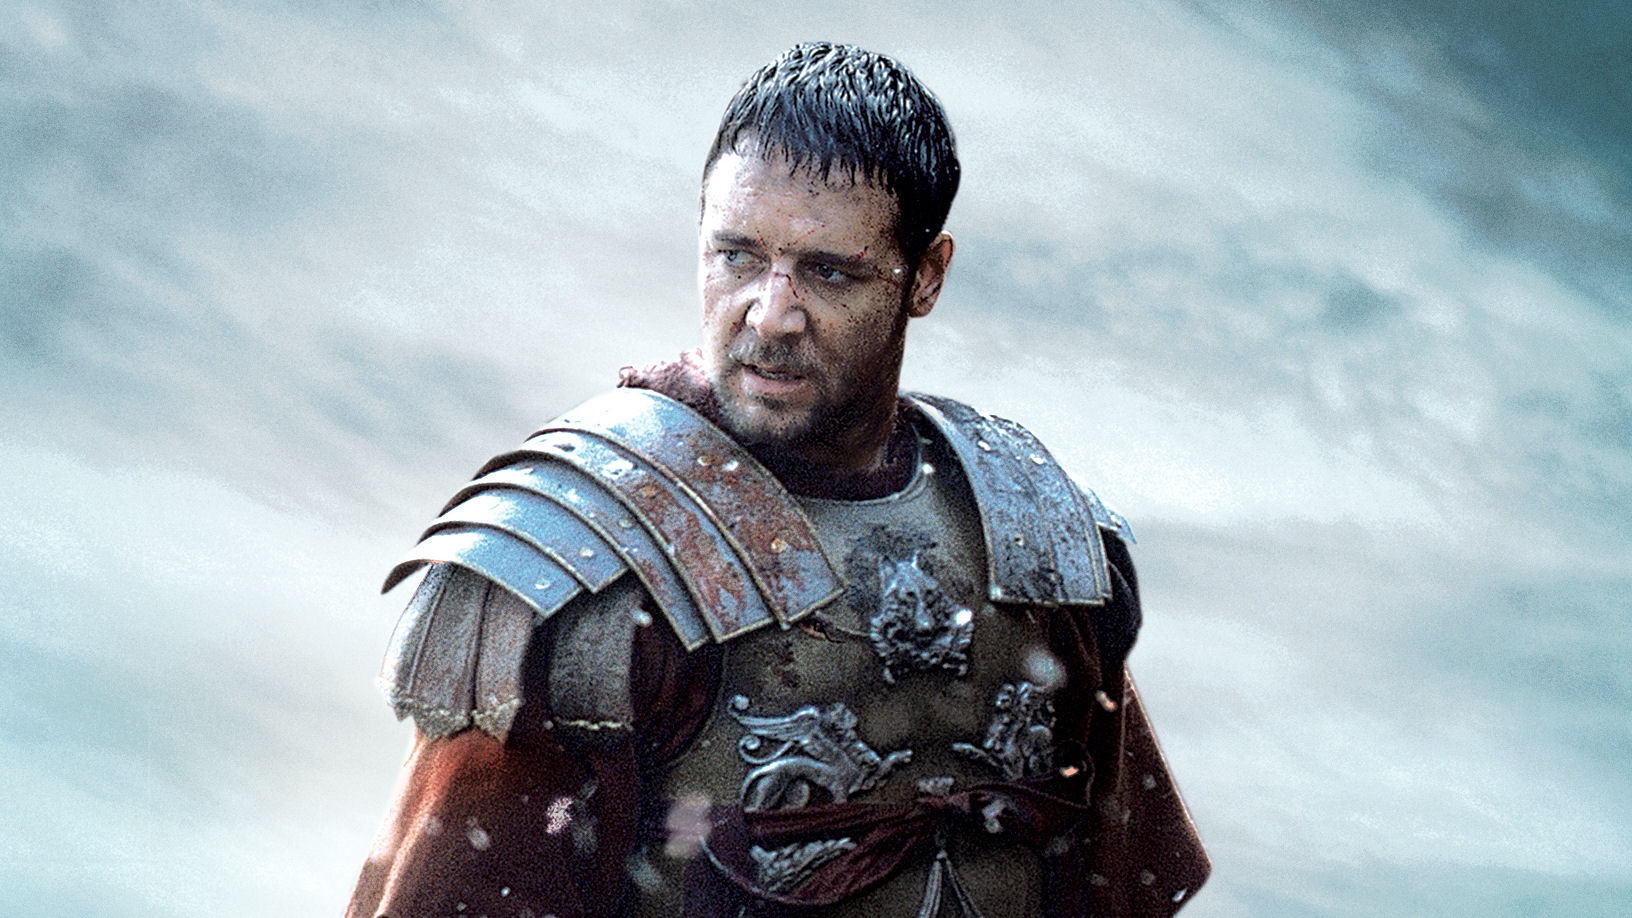 Russell Crowe in Ridley Scott's "Gladiator."